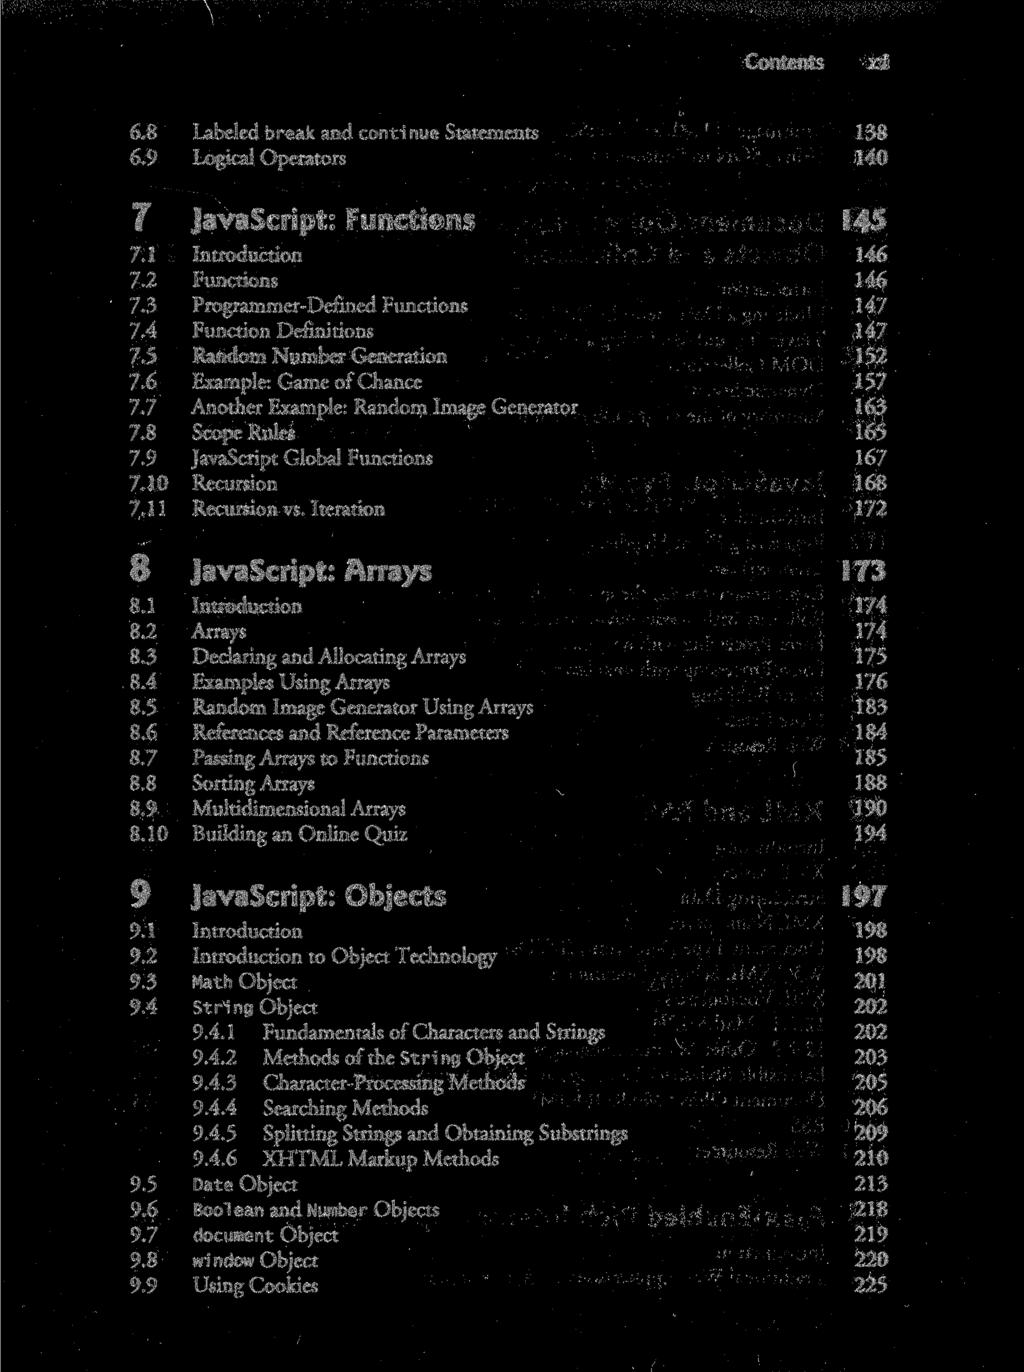 6.8 Labeled break and conti nue Statements 6.9 Logical Operators 7 JavaScript: Functions 7.1 Introduction 7.2 Functions 7.3 Programmer-Defined Functions 7.4 Function Definitions 7.